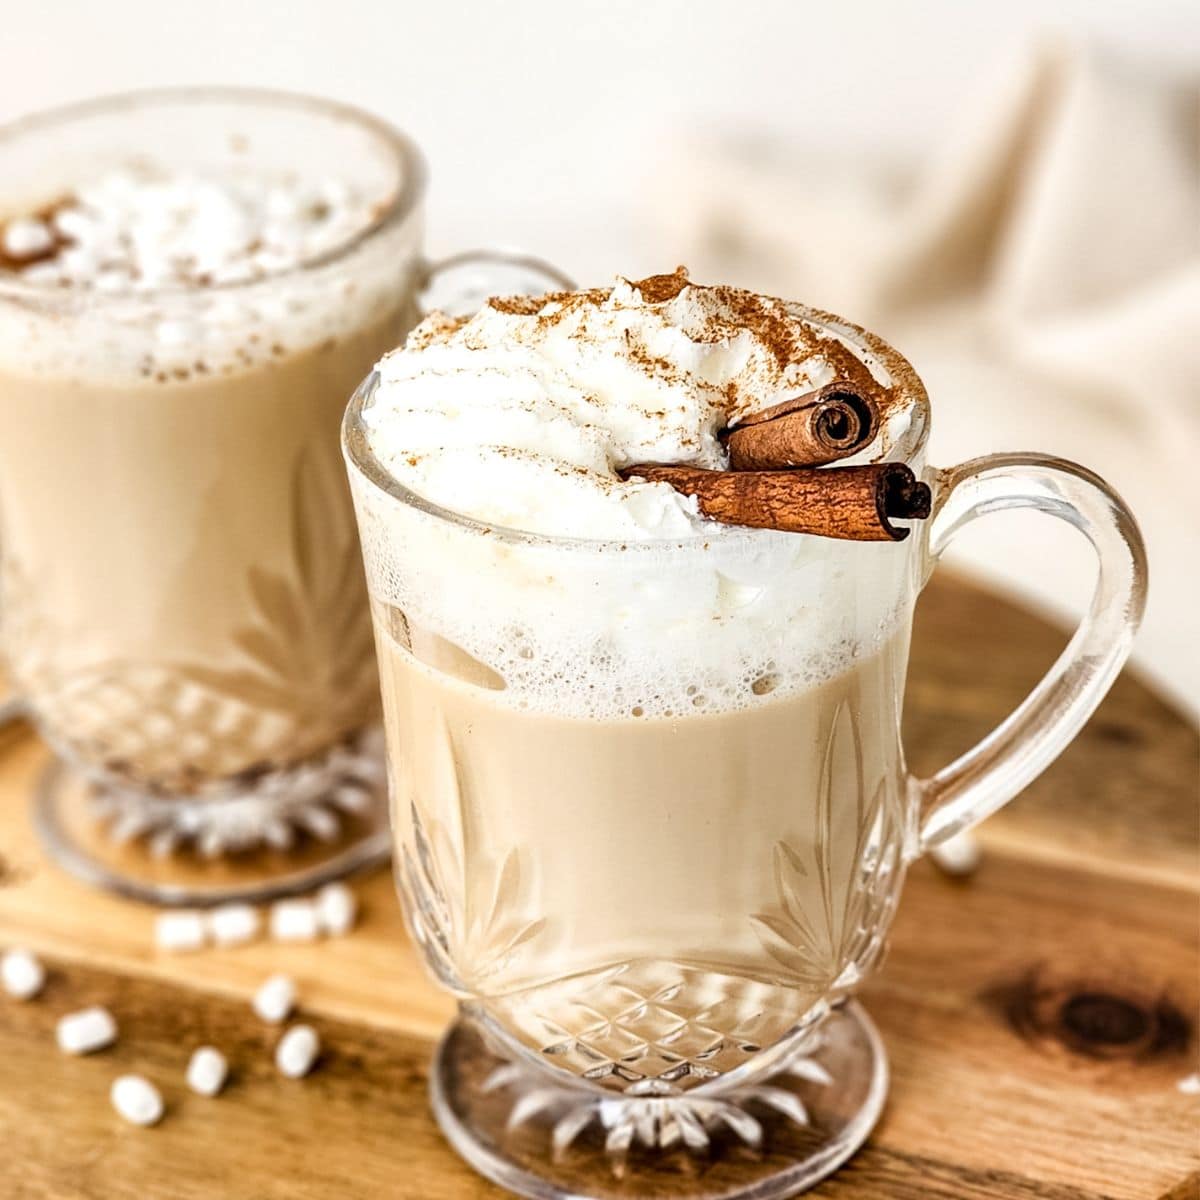 Eggnog latte in a glass mug garnished with whipped cream.